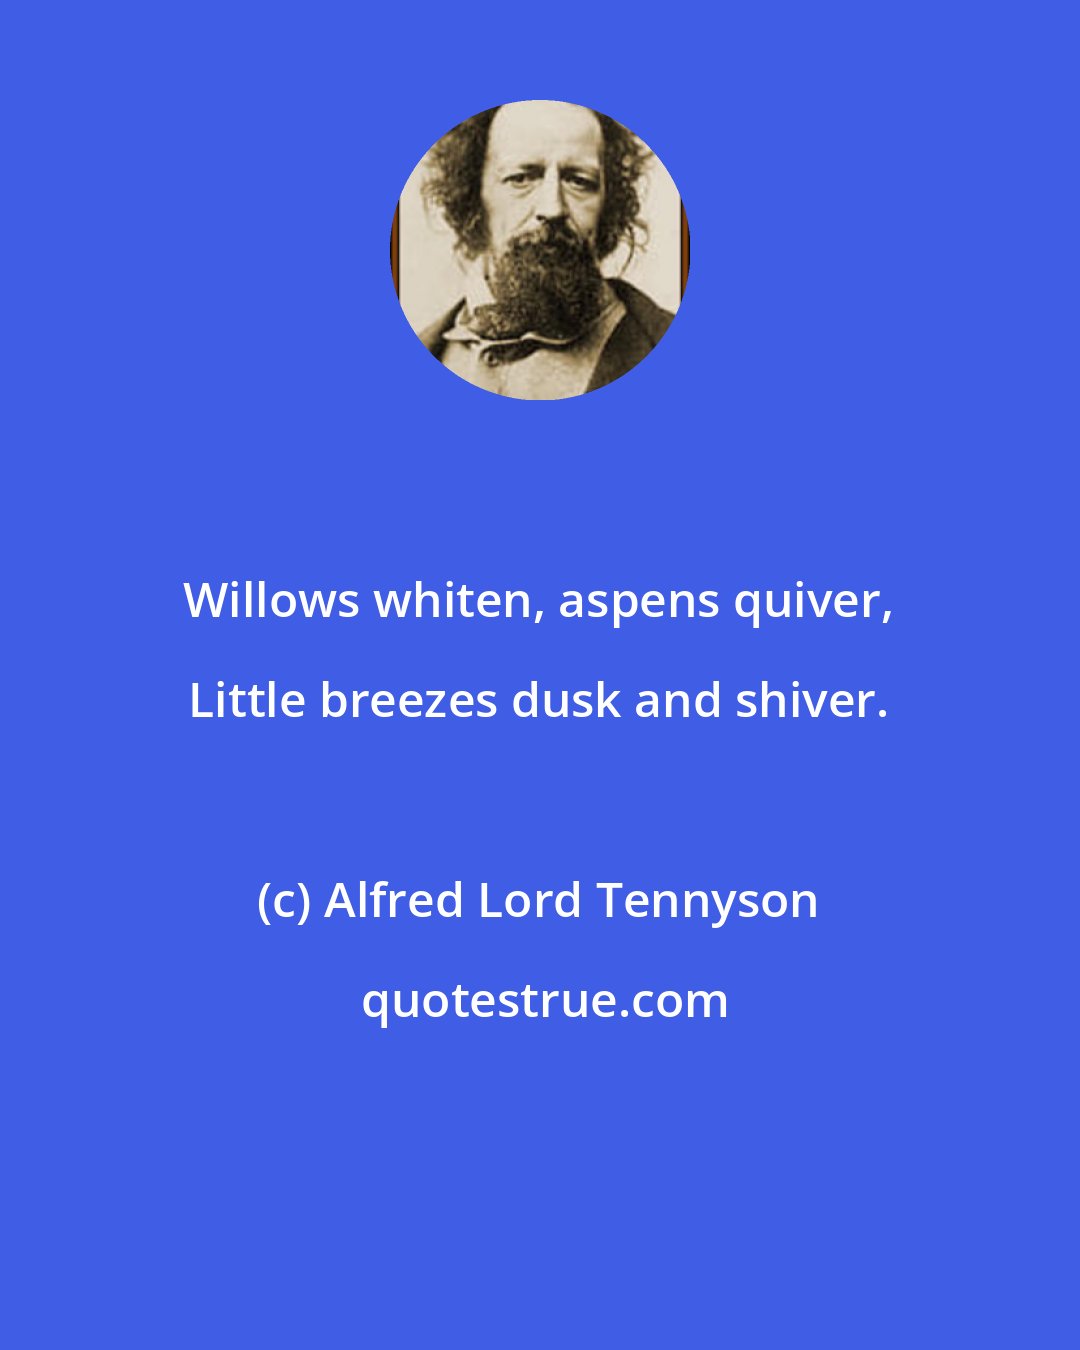 Alfred Lord Tennyson: Willows whiten, aspens quiver, Little breezes dusk and shiver.